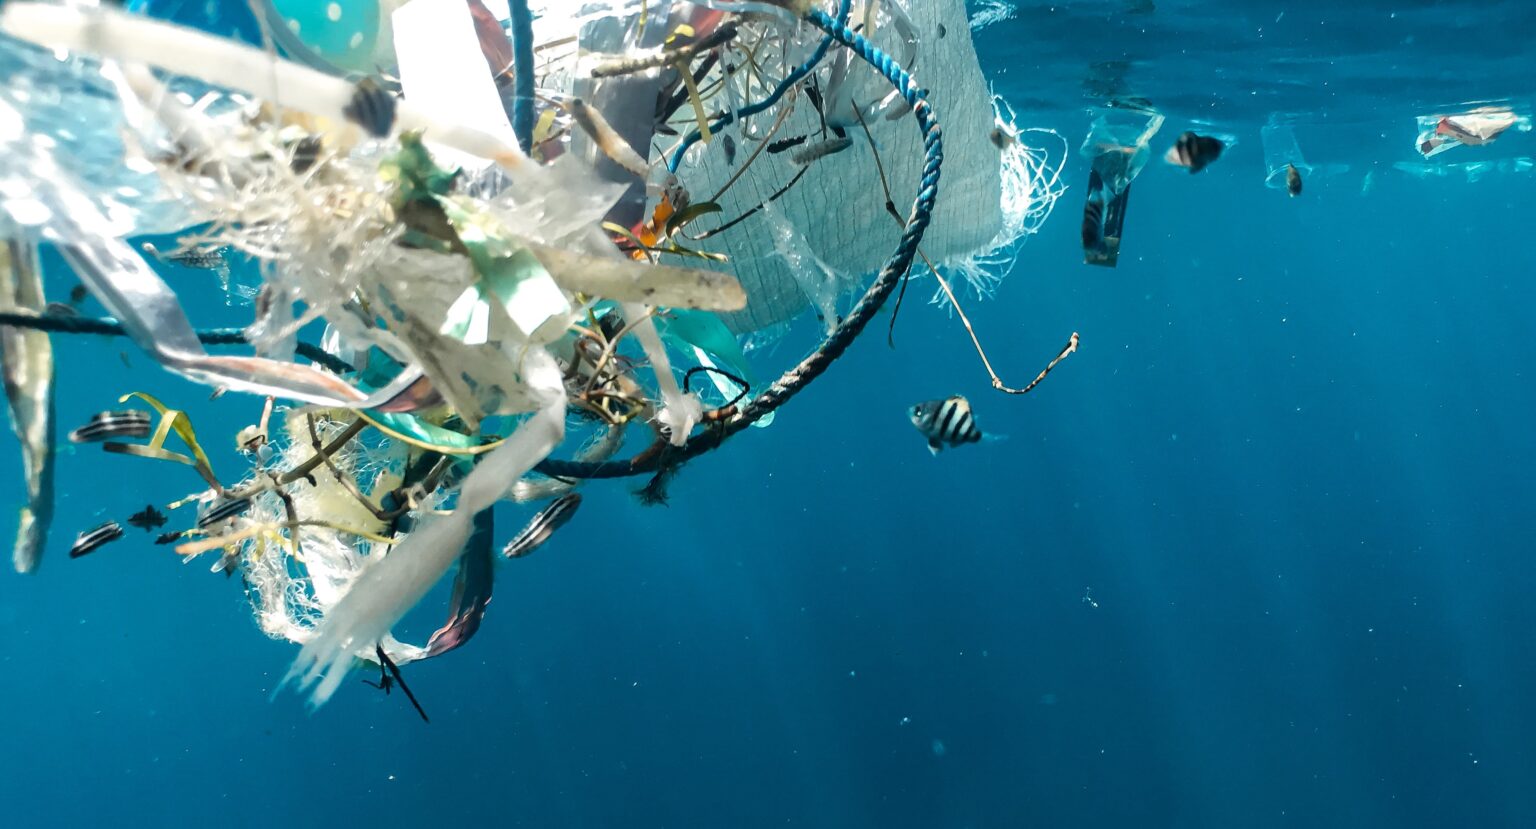 Marine life ‘thriving’ in Great Pacific Garbage Patch